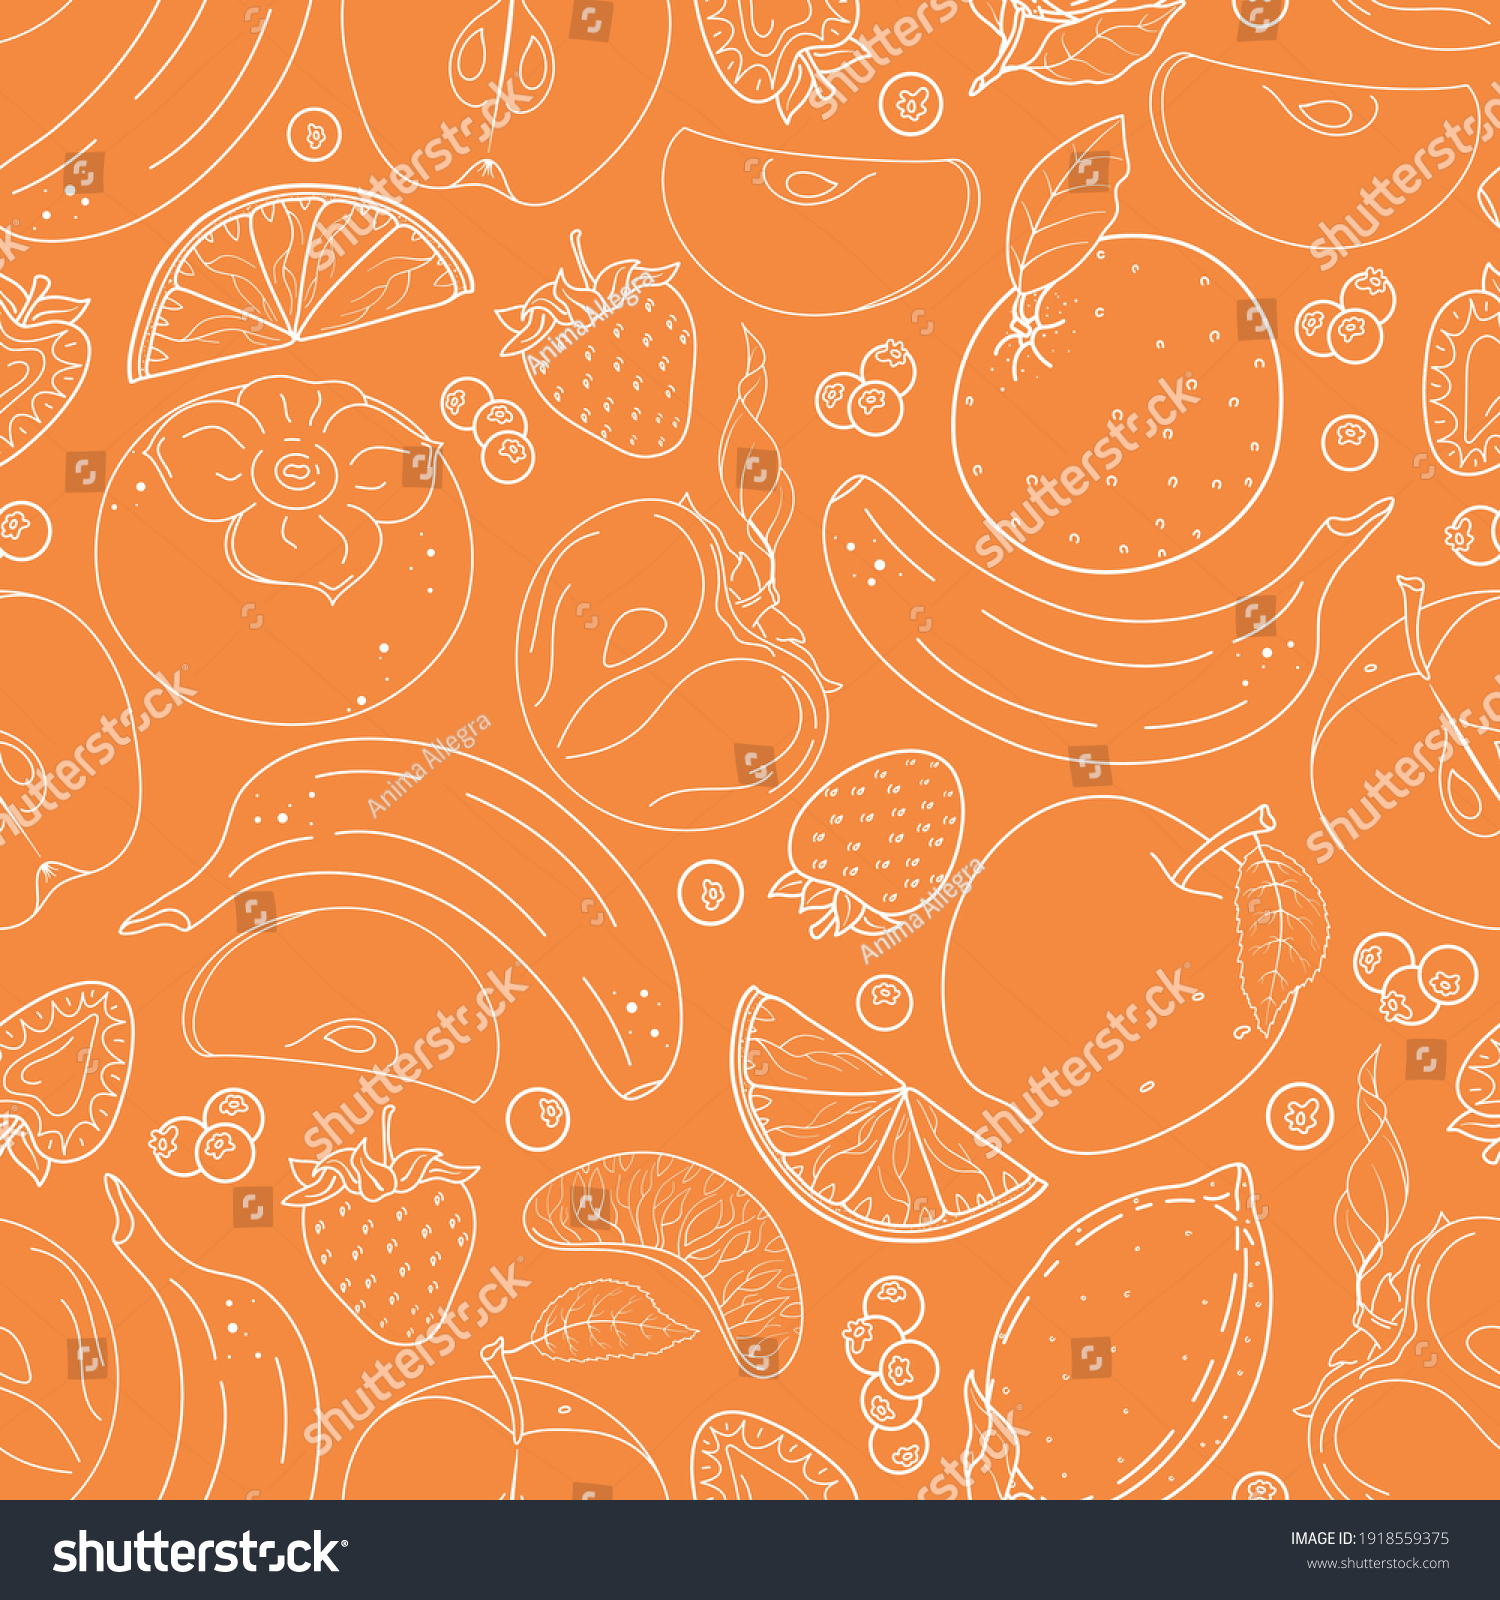 Seamless vector pattern with cute hand drawn various fruits and berries. Fruity theme doodle elements. White line objects on orange background. For wrapping paper, textile, print, fabric, wallpaper. #1918559375